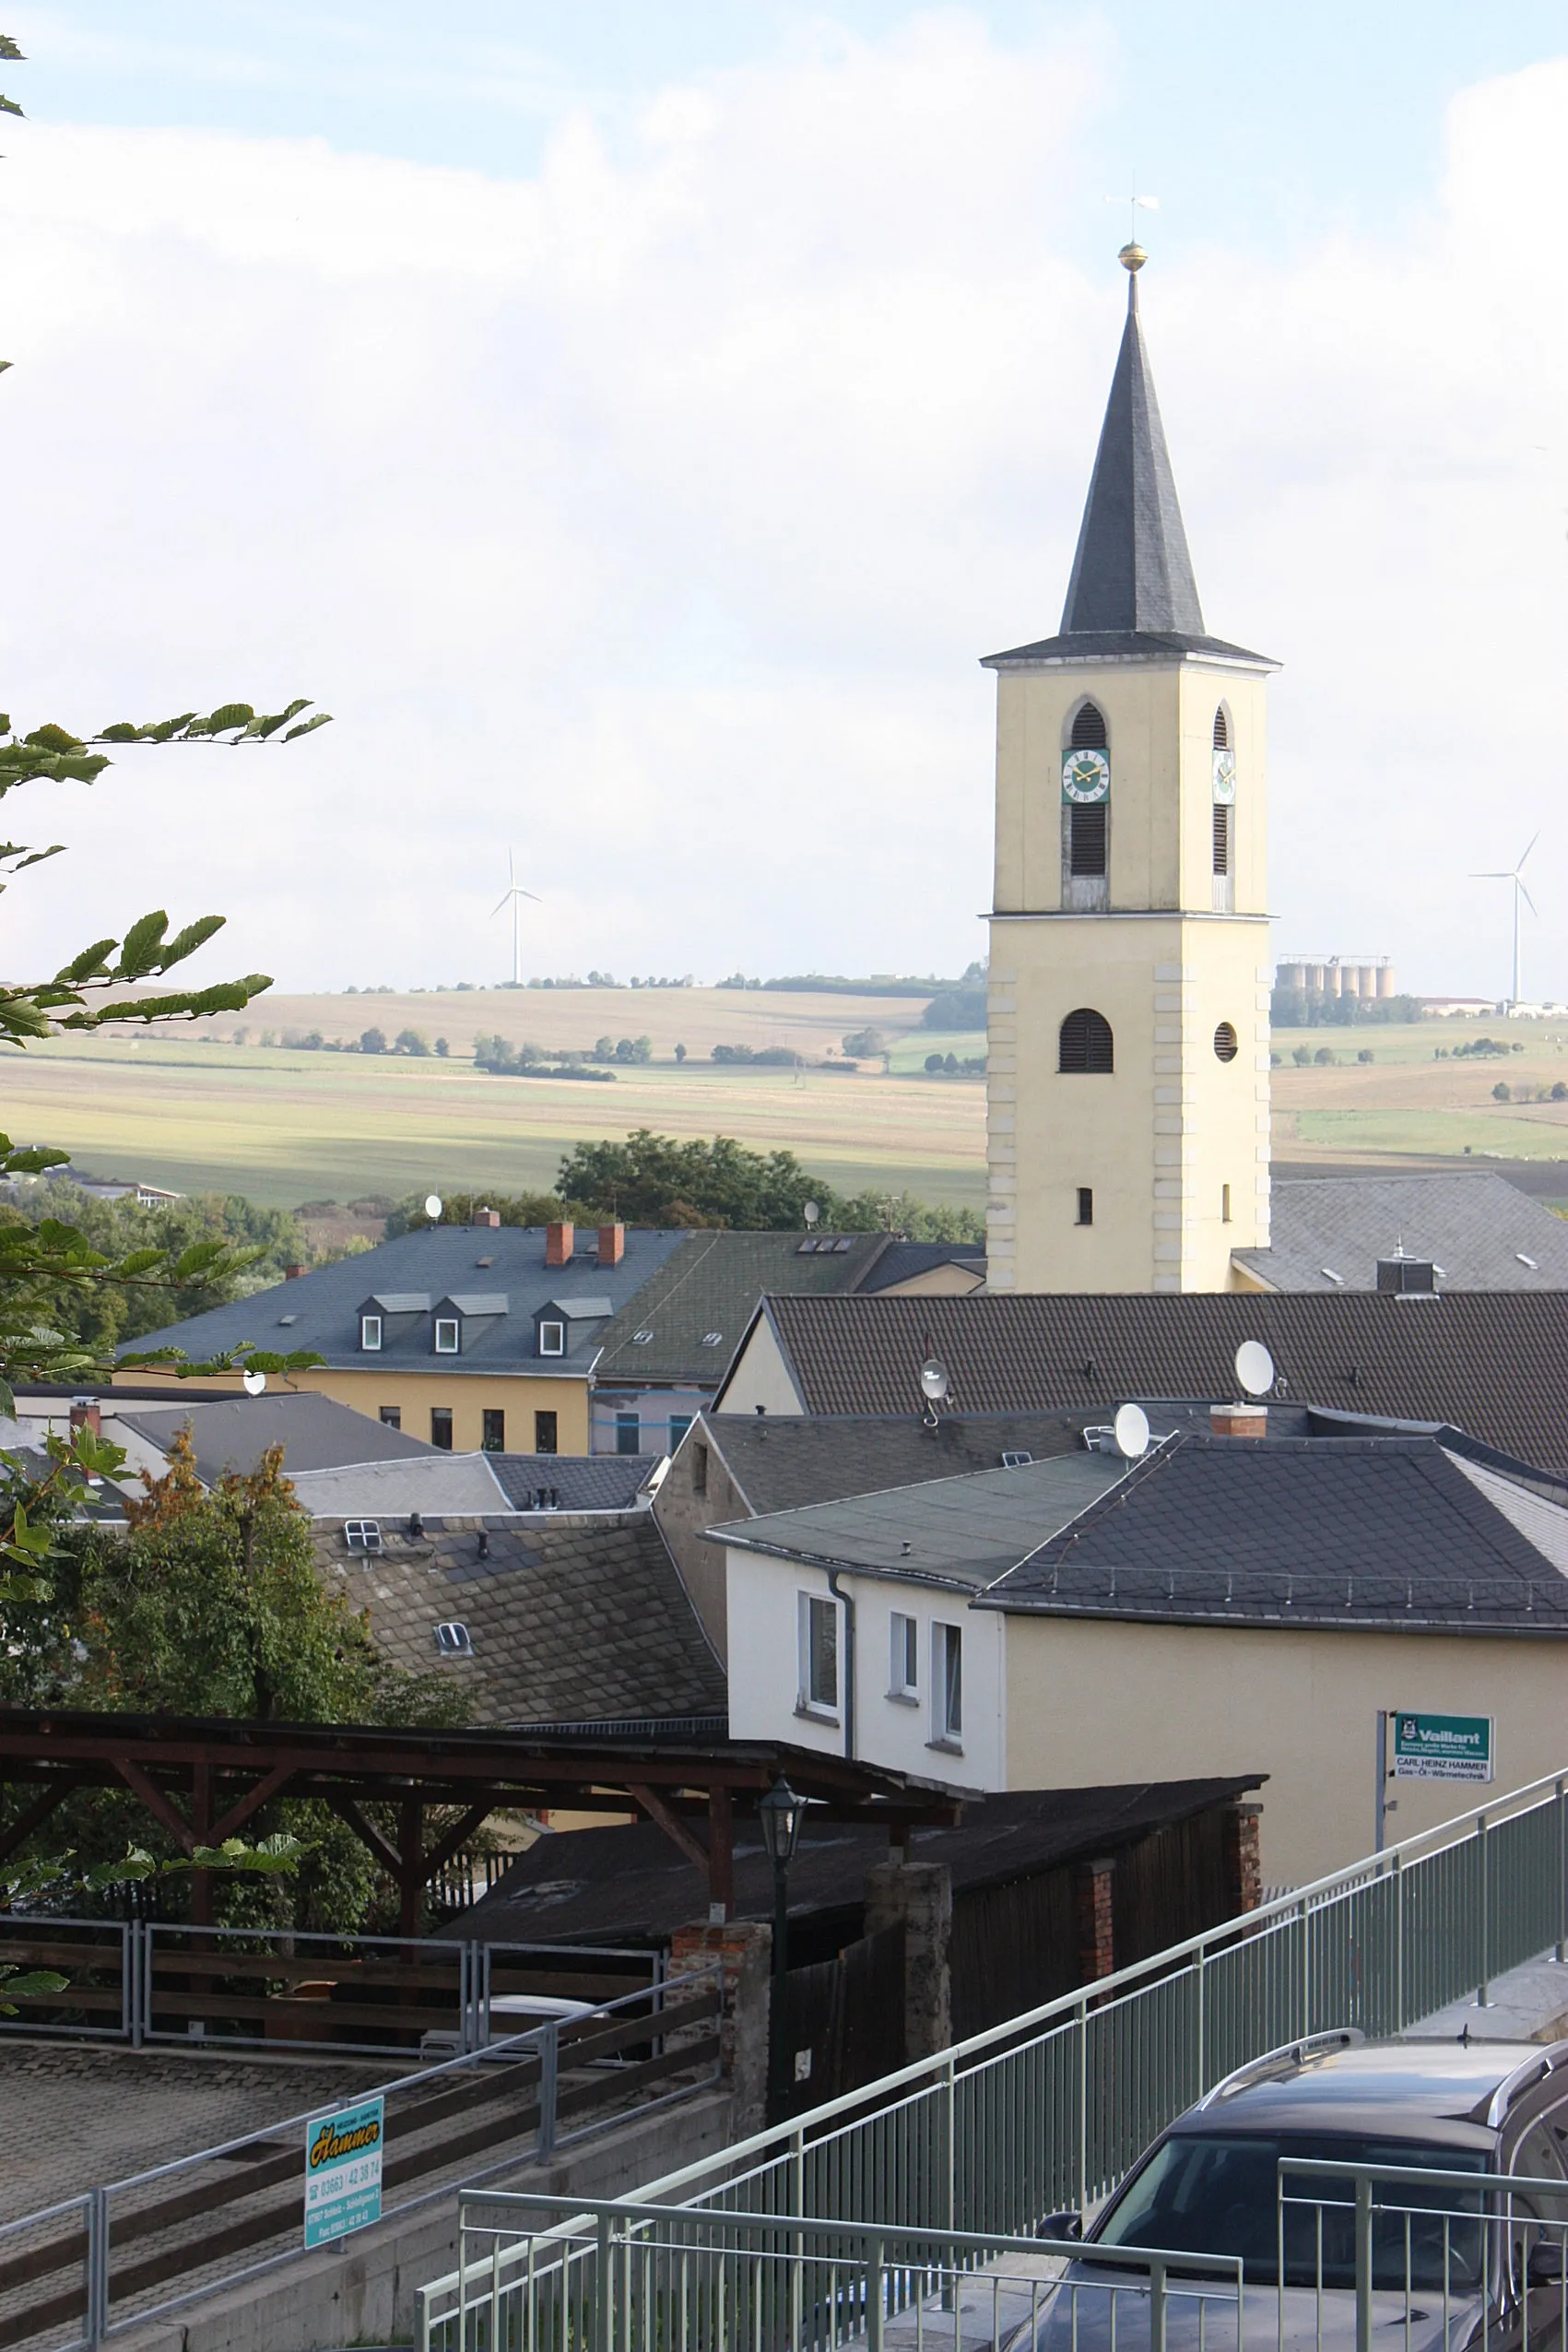 Photo showing: Schleiz, view from Schlossberg to the tower of the Saint George church